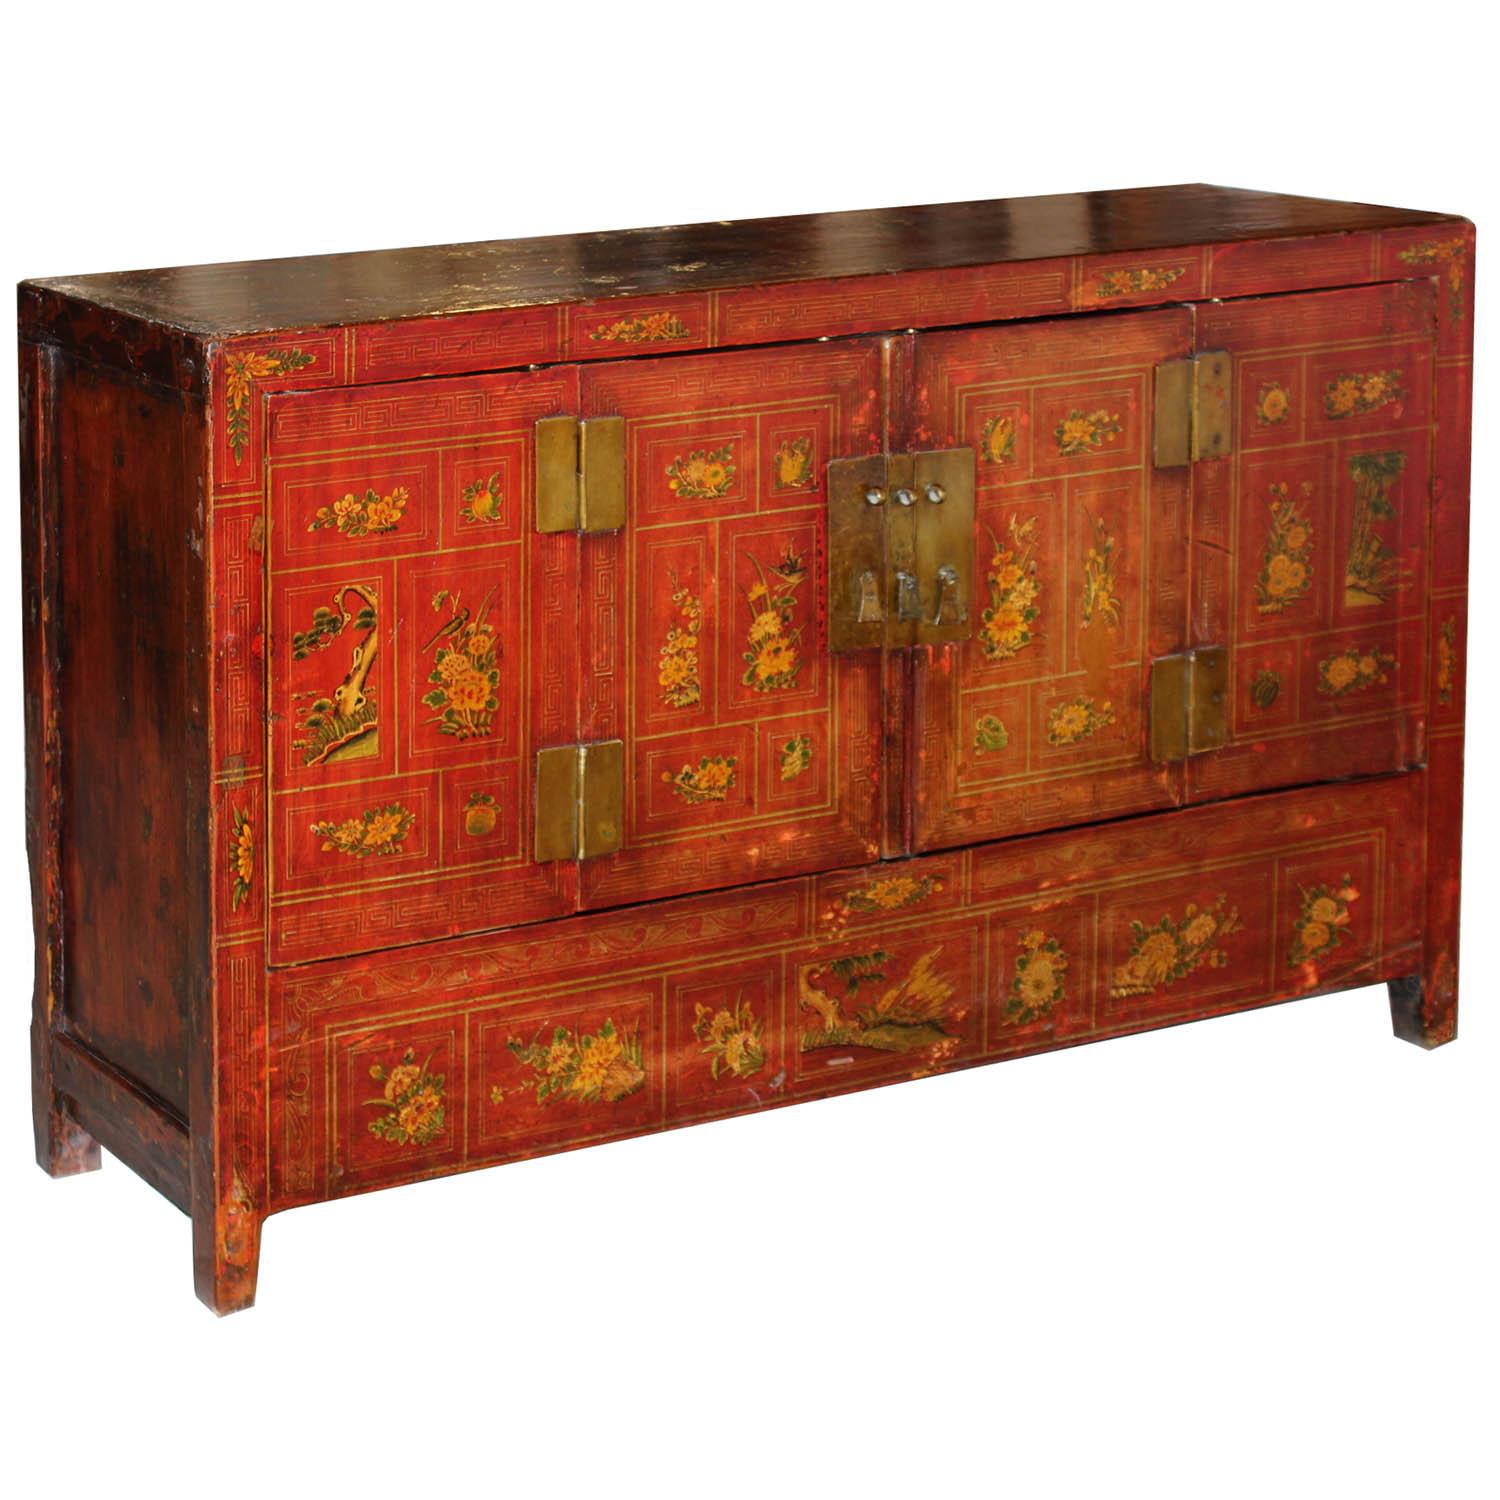 Four-door red lacquered wedding buffet with hand-painted gold leaf flowers and Greek key design. New interior shelf and hardware and accordion doors. Made in Dongbei, China, circa 1890. Some wear.

 